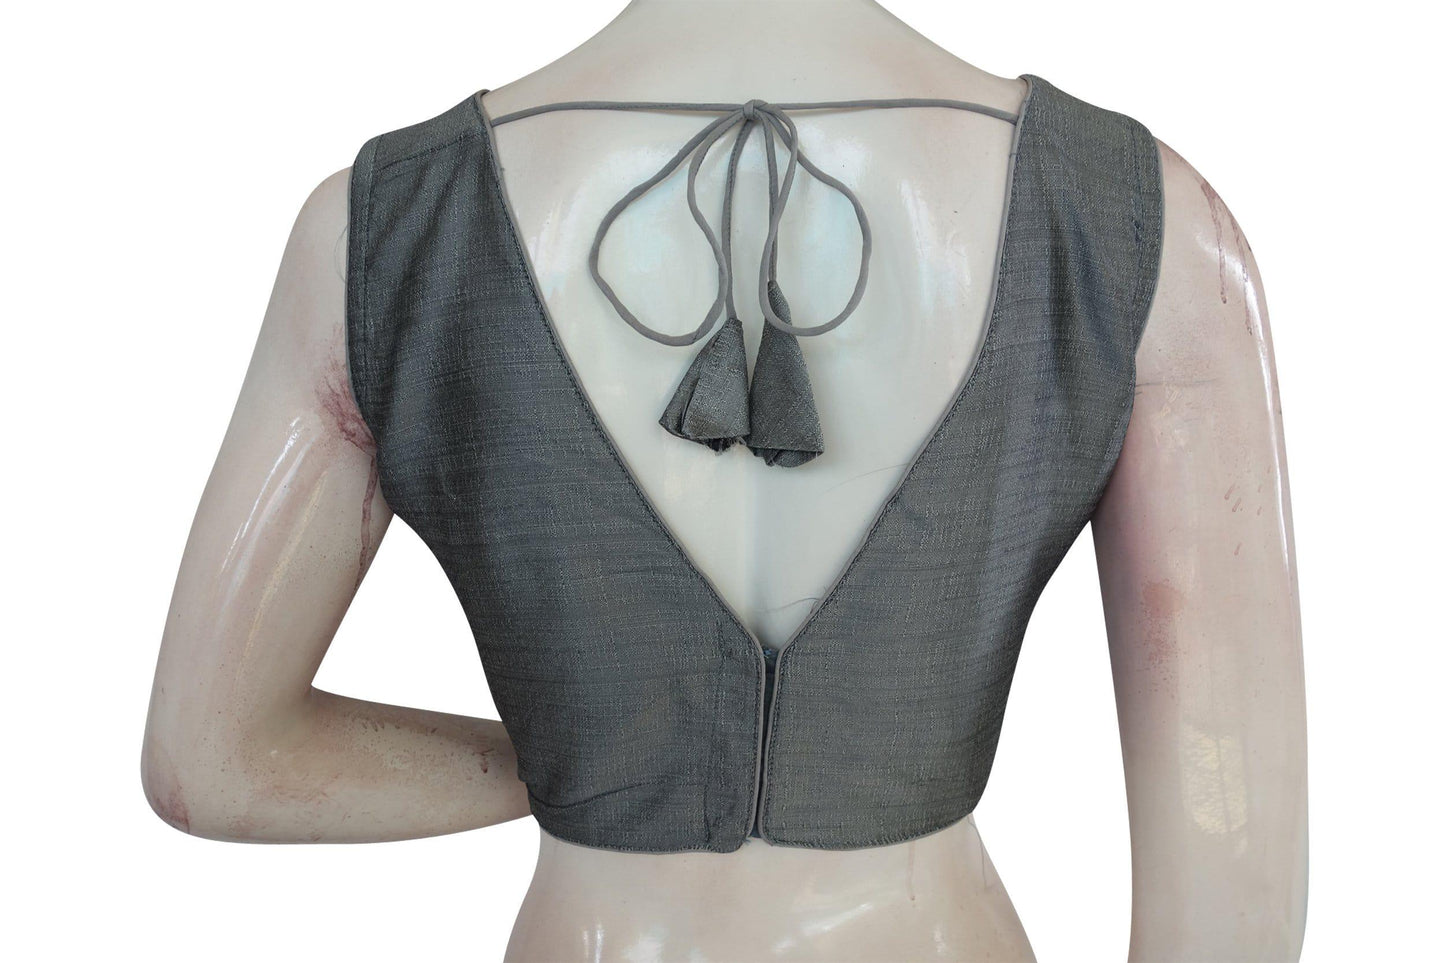 grey colour plain v neck readymade blouse from d3 blouses